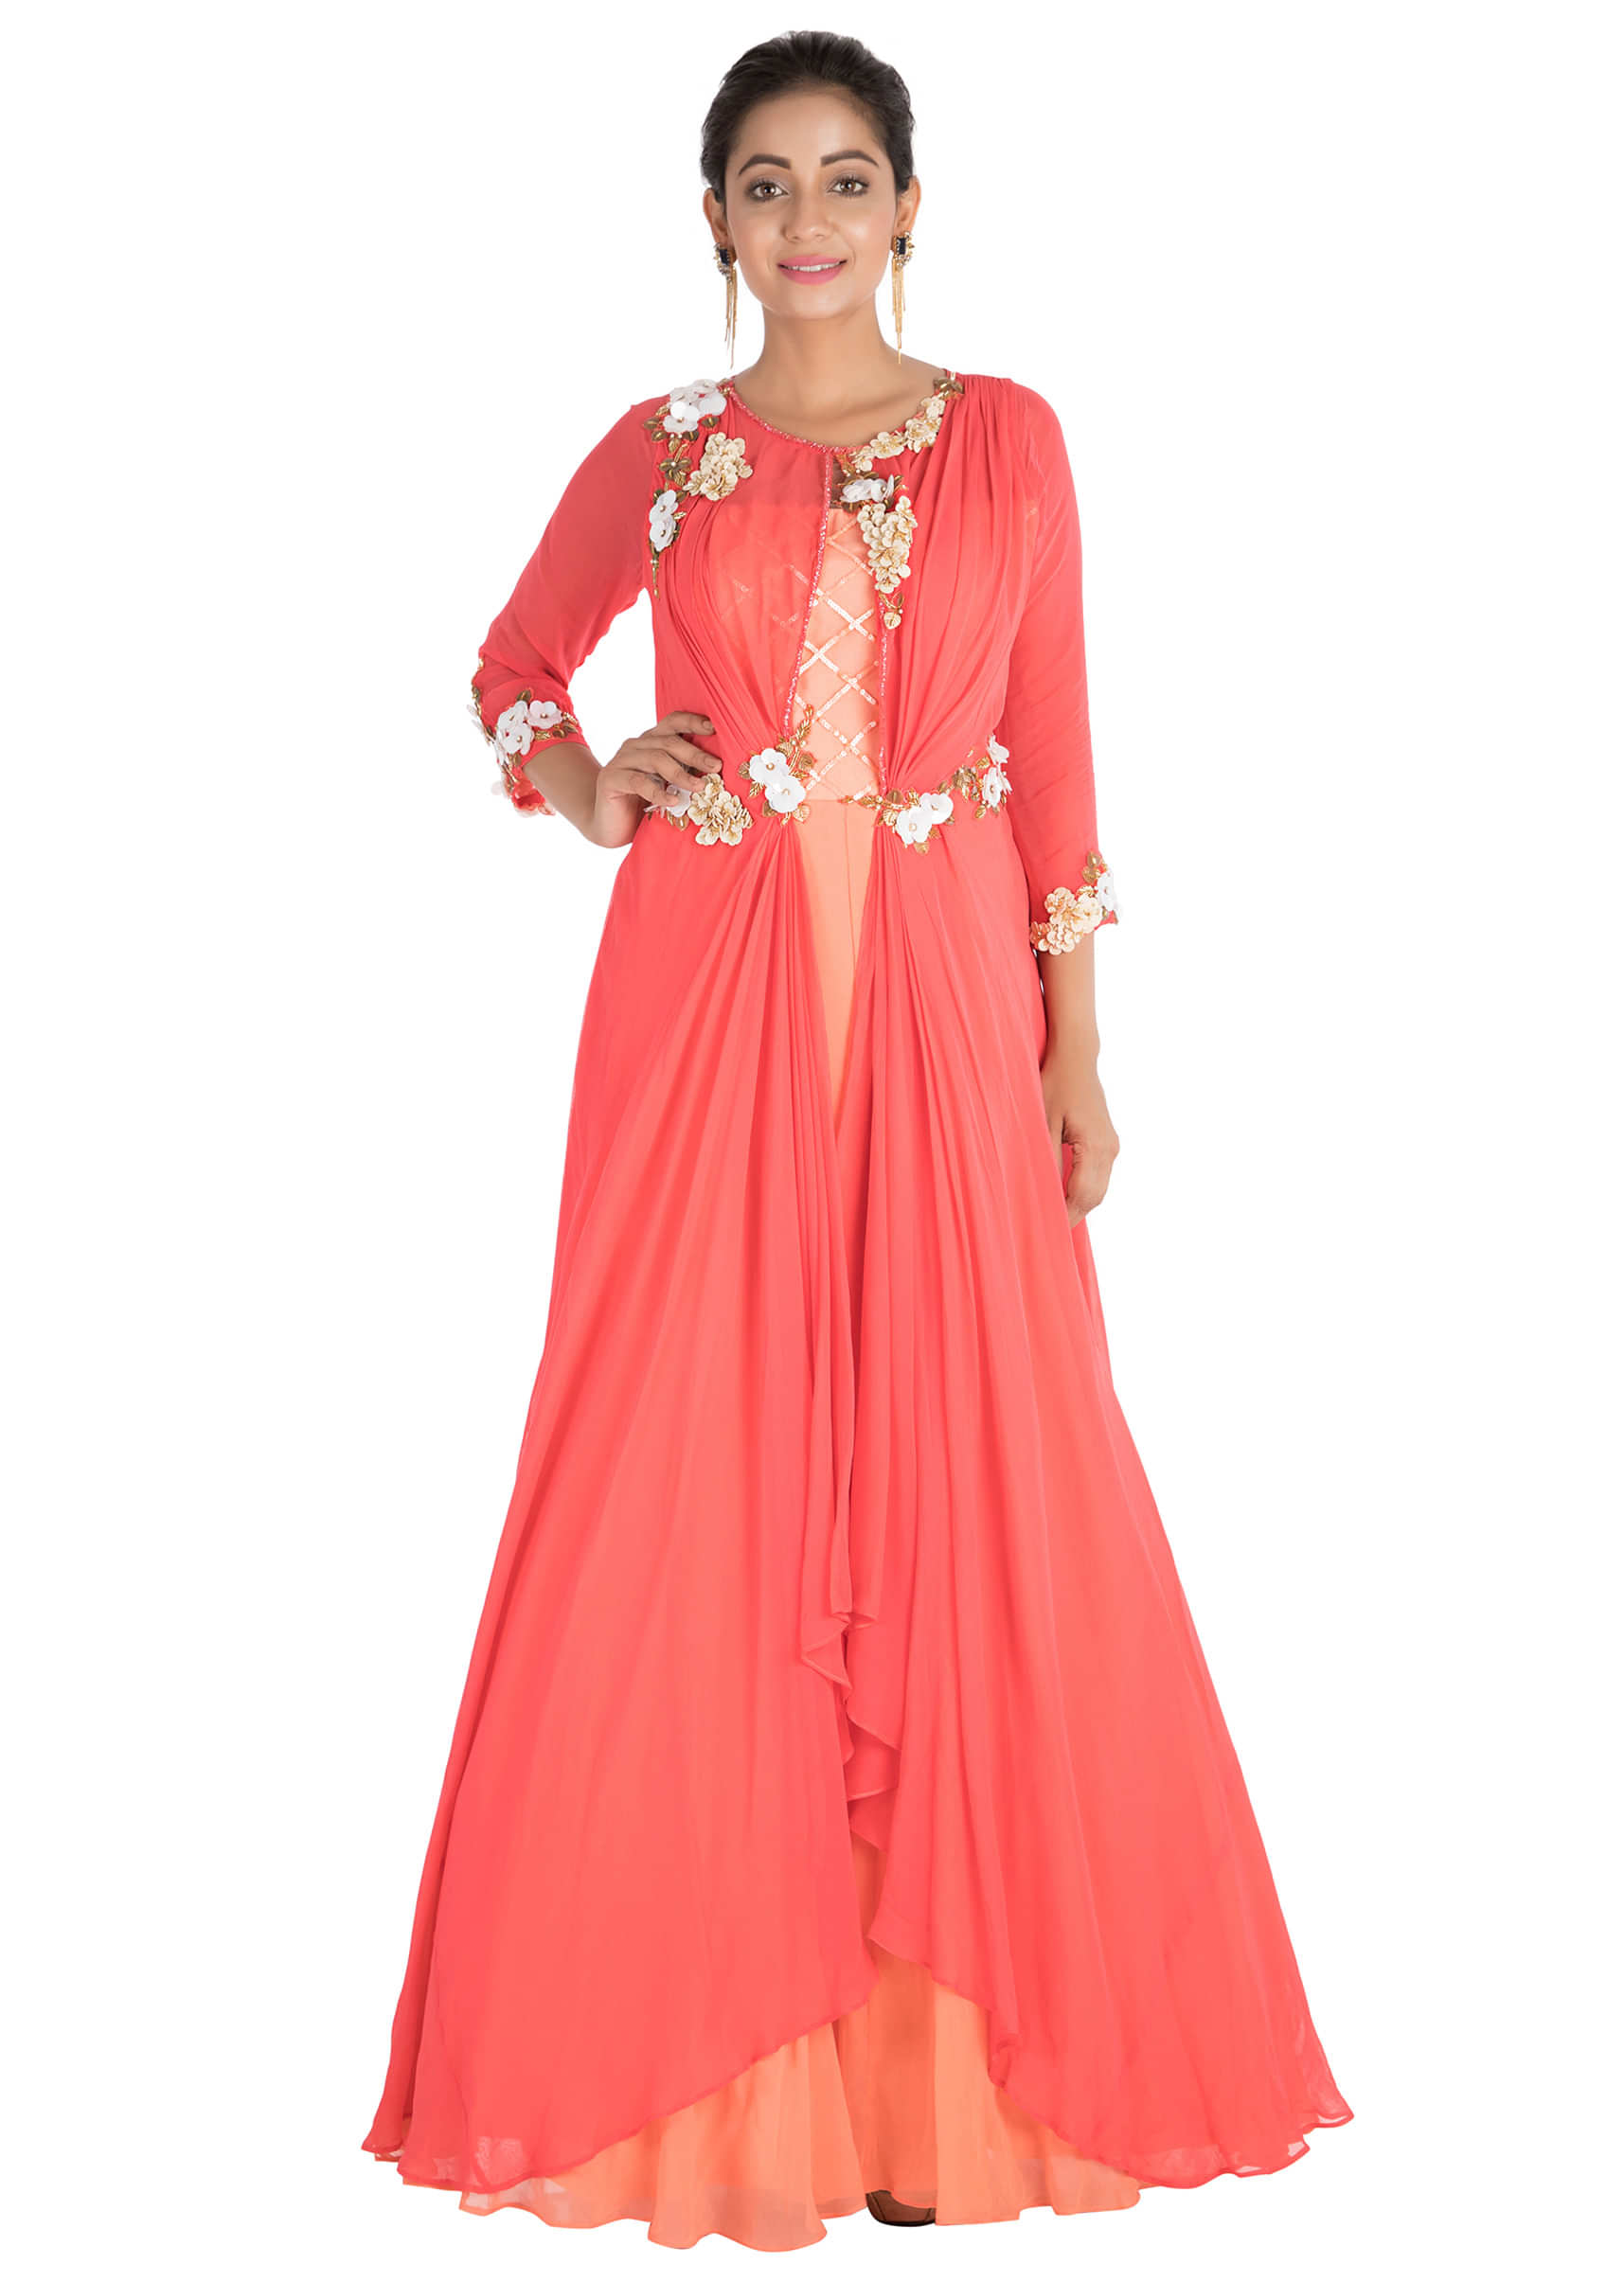 Hand embroidered Bright coral and peach layered dress